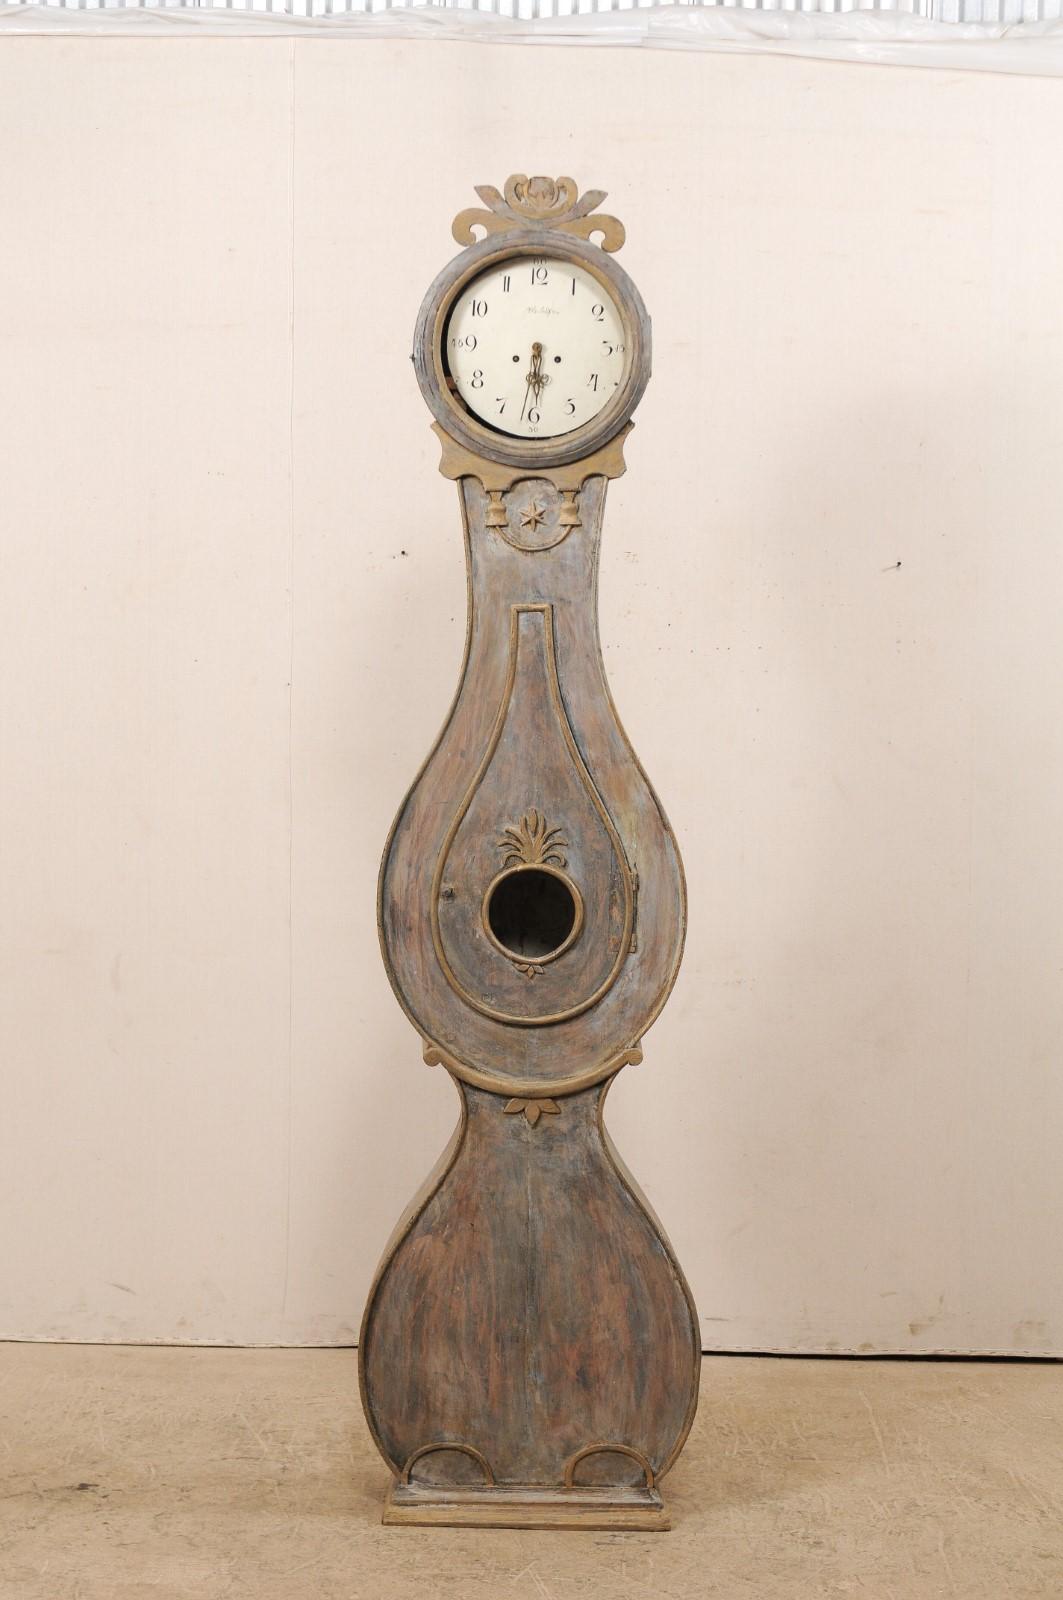 A tall Swedish Fryksdahl floor clock from the 19th century. This Fryksdahl clock from Sweden showcases ornamental carvings throughout, which enhance and accentuate this shapely clock. The crest or crown features a pierced carving in foliage inspired